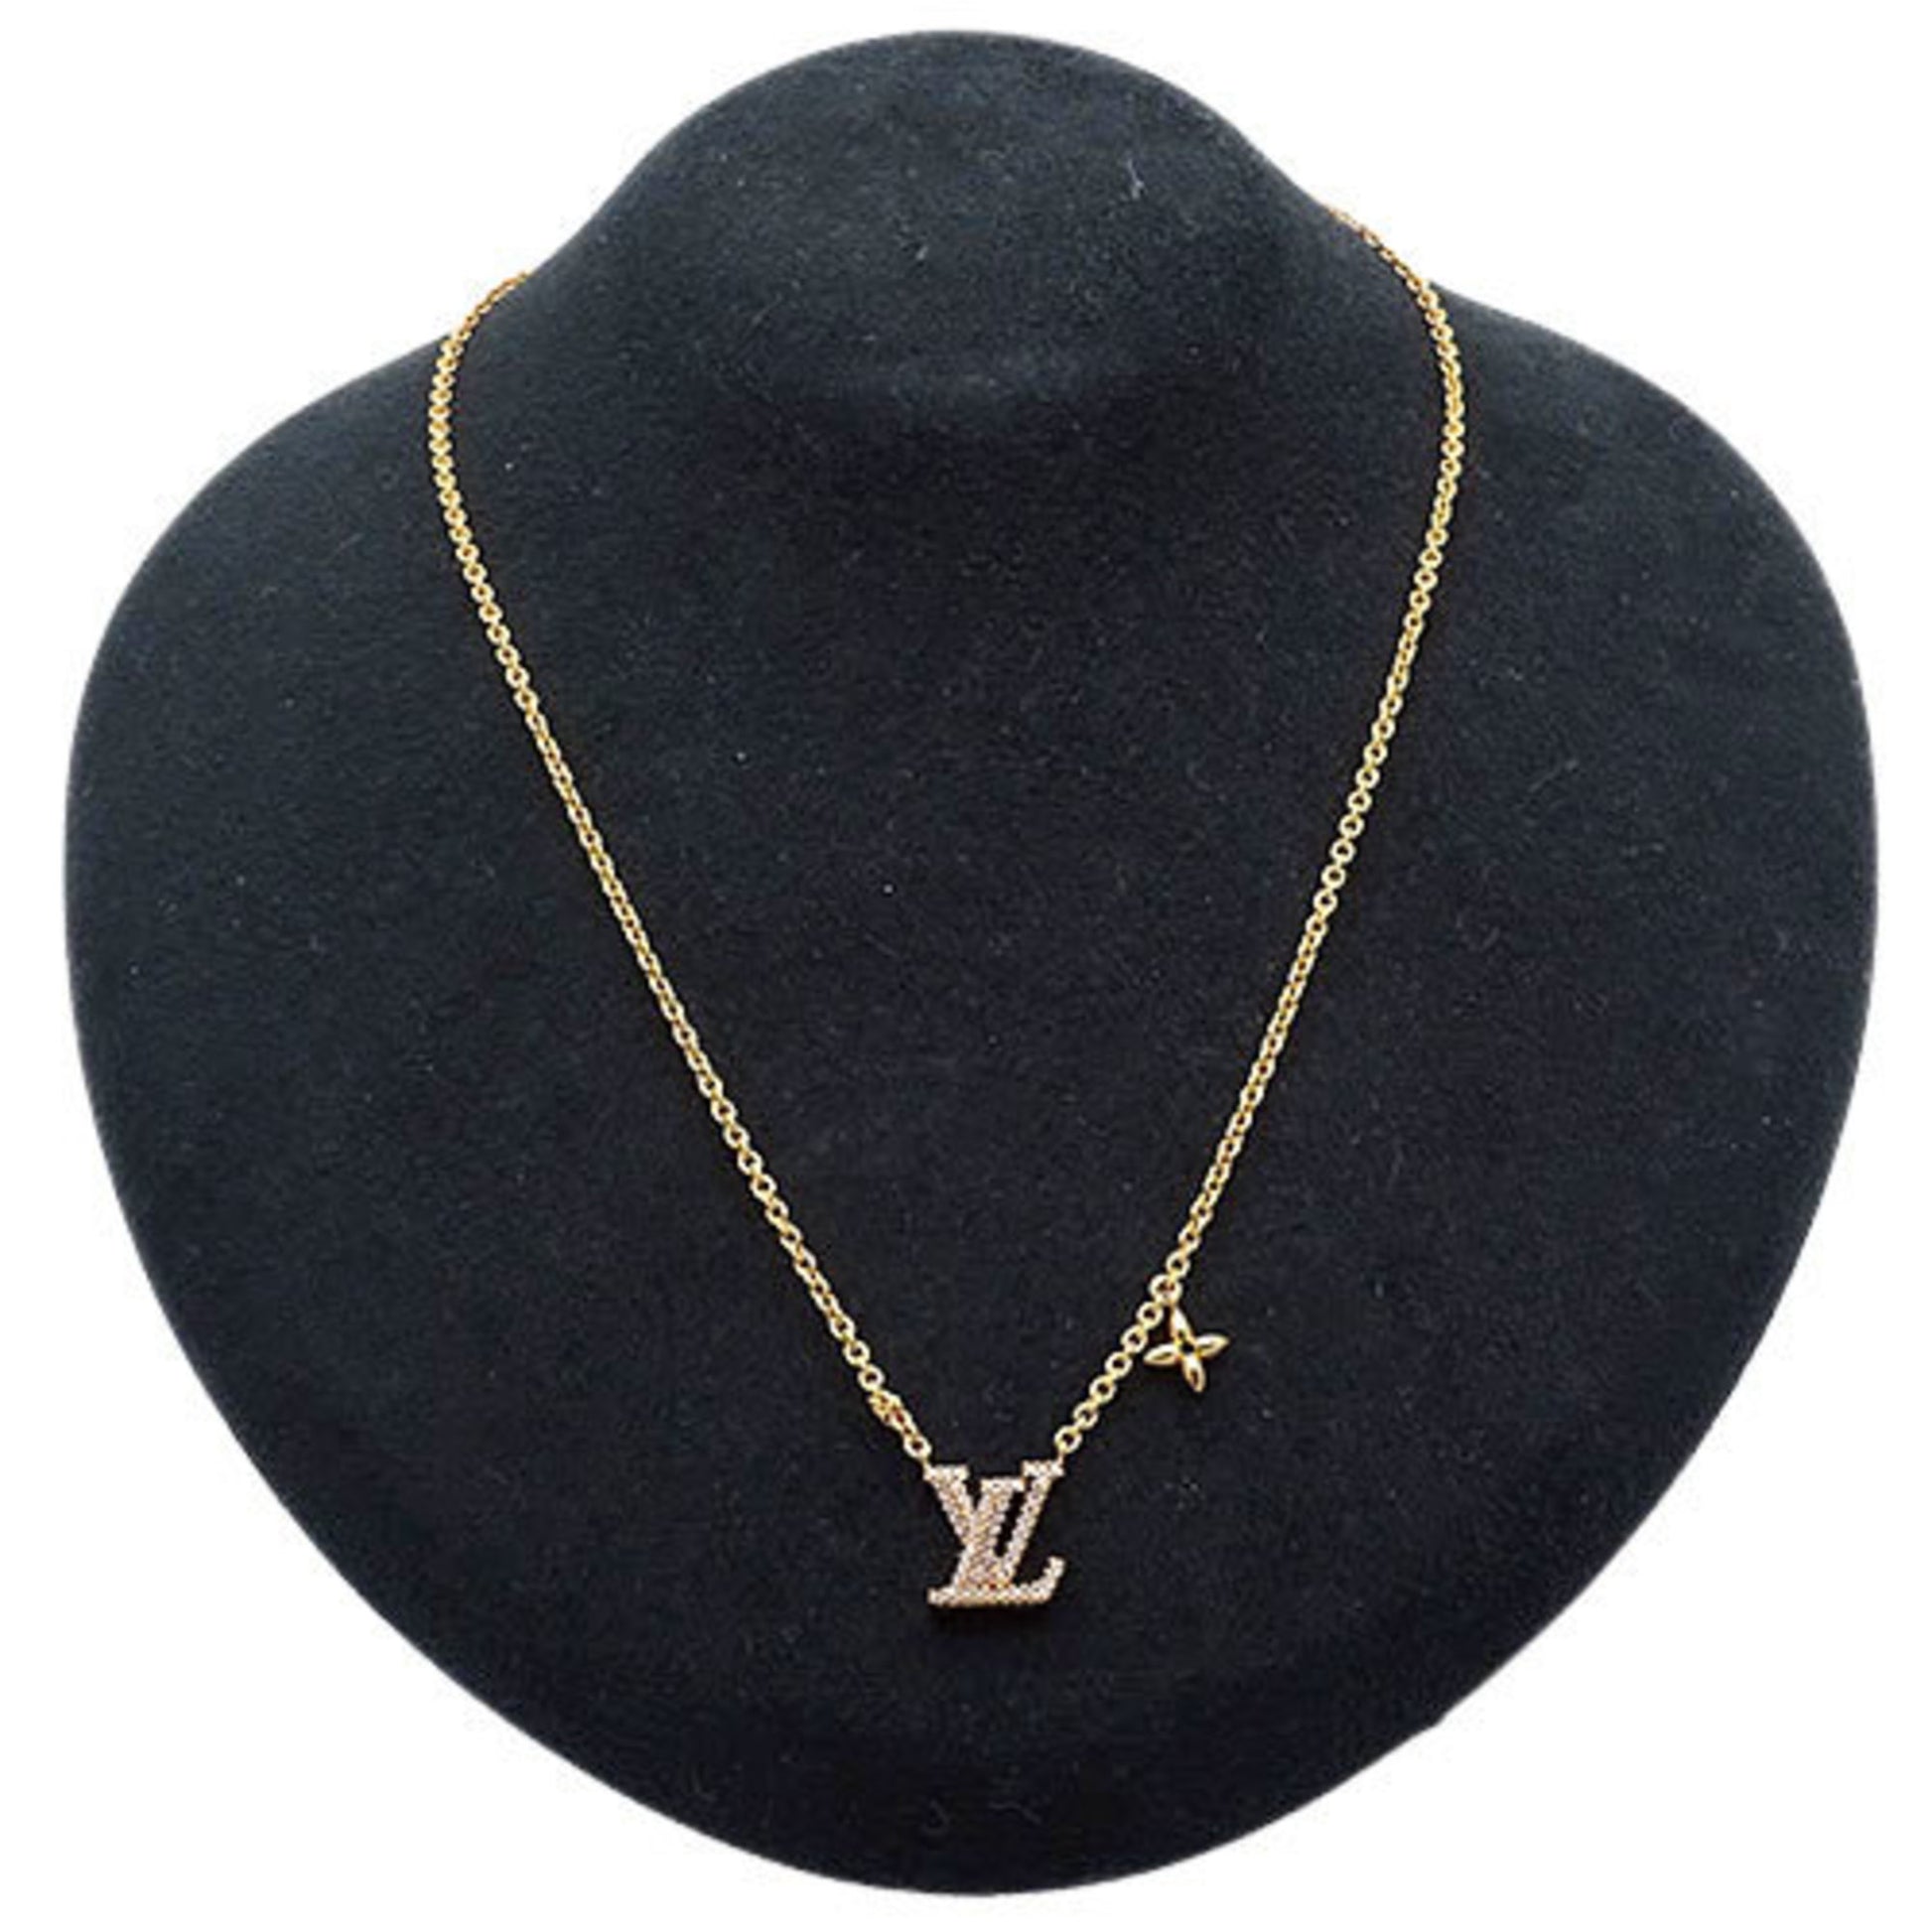 Shop Louis Vuitton Lv iconic necklace (M00596) by パリの凱旋門